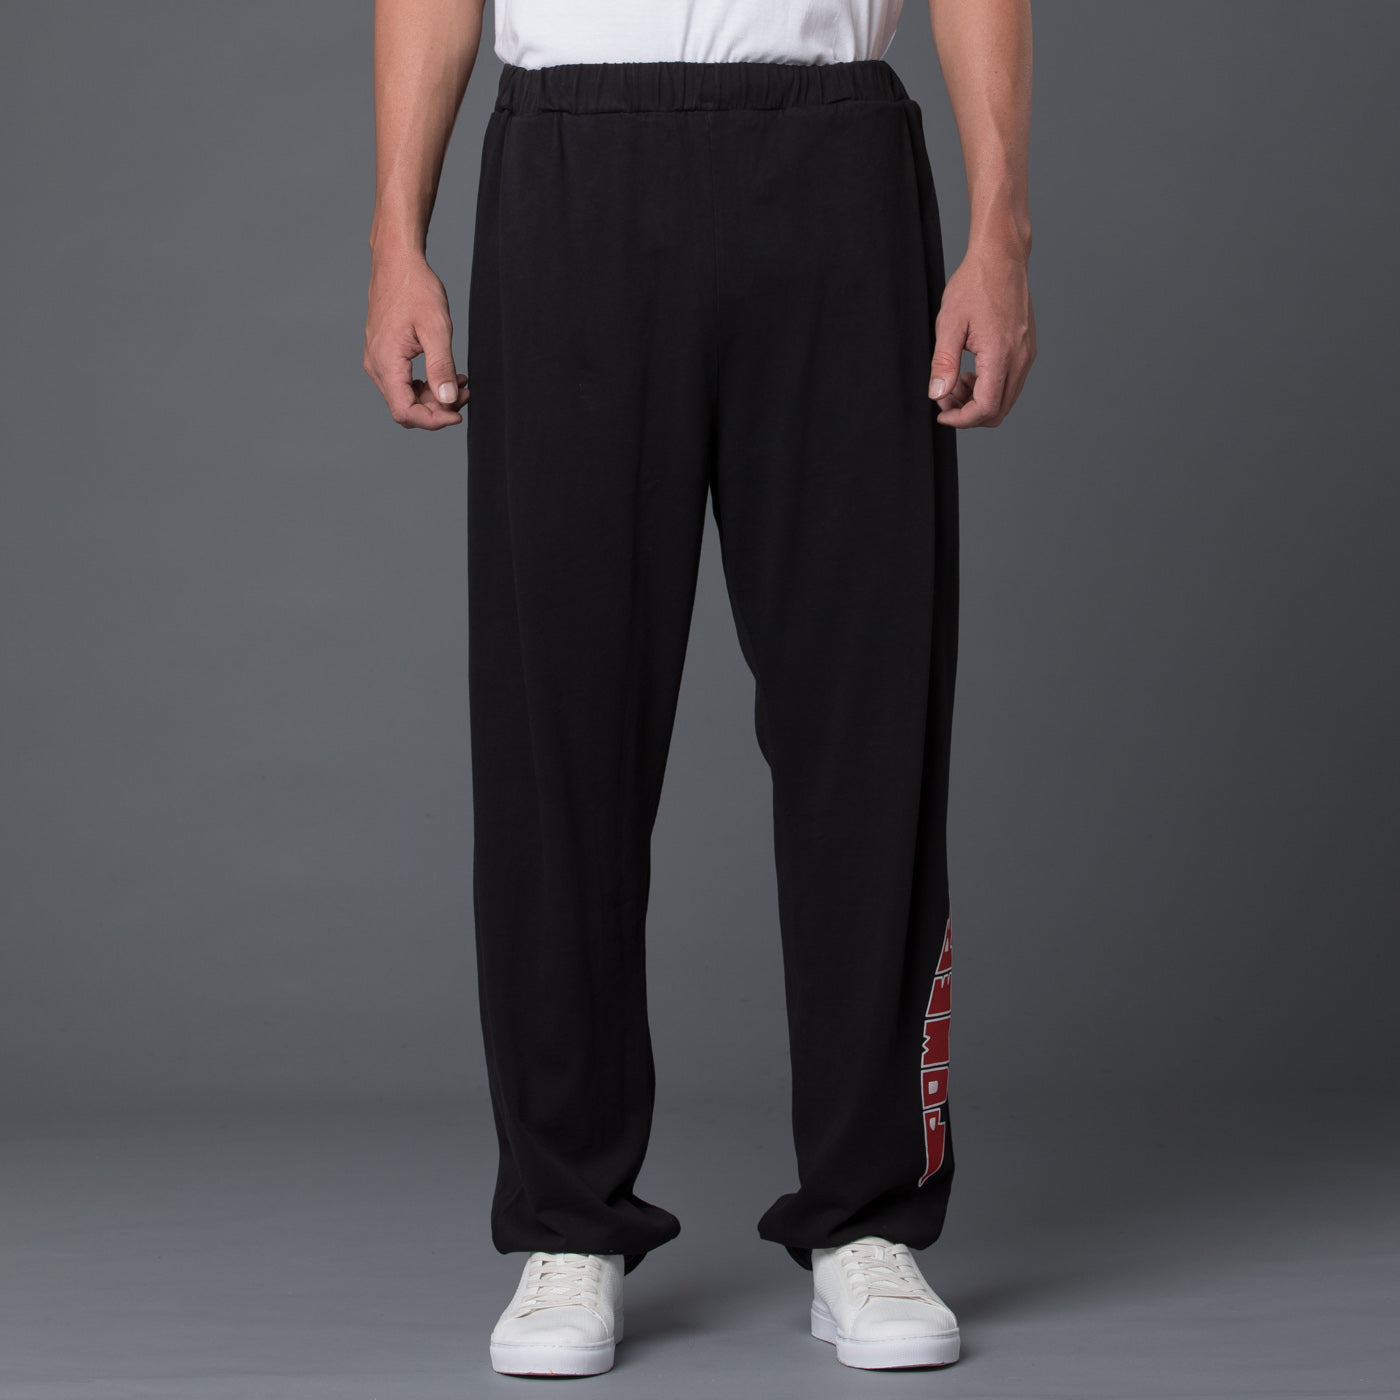 Willy Chavarria Cholo Sweatpant